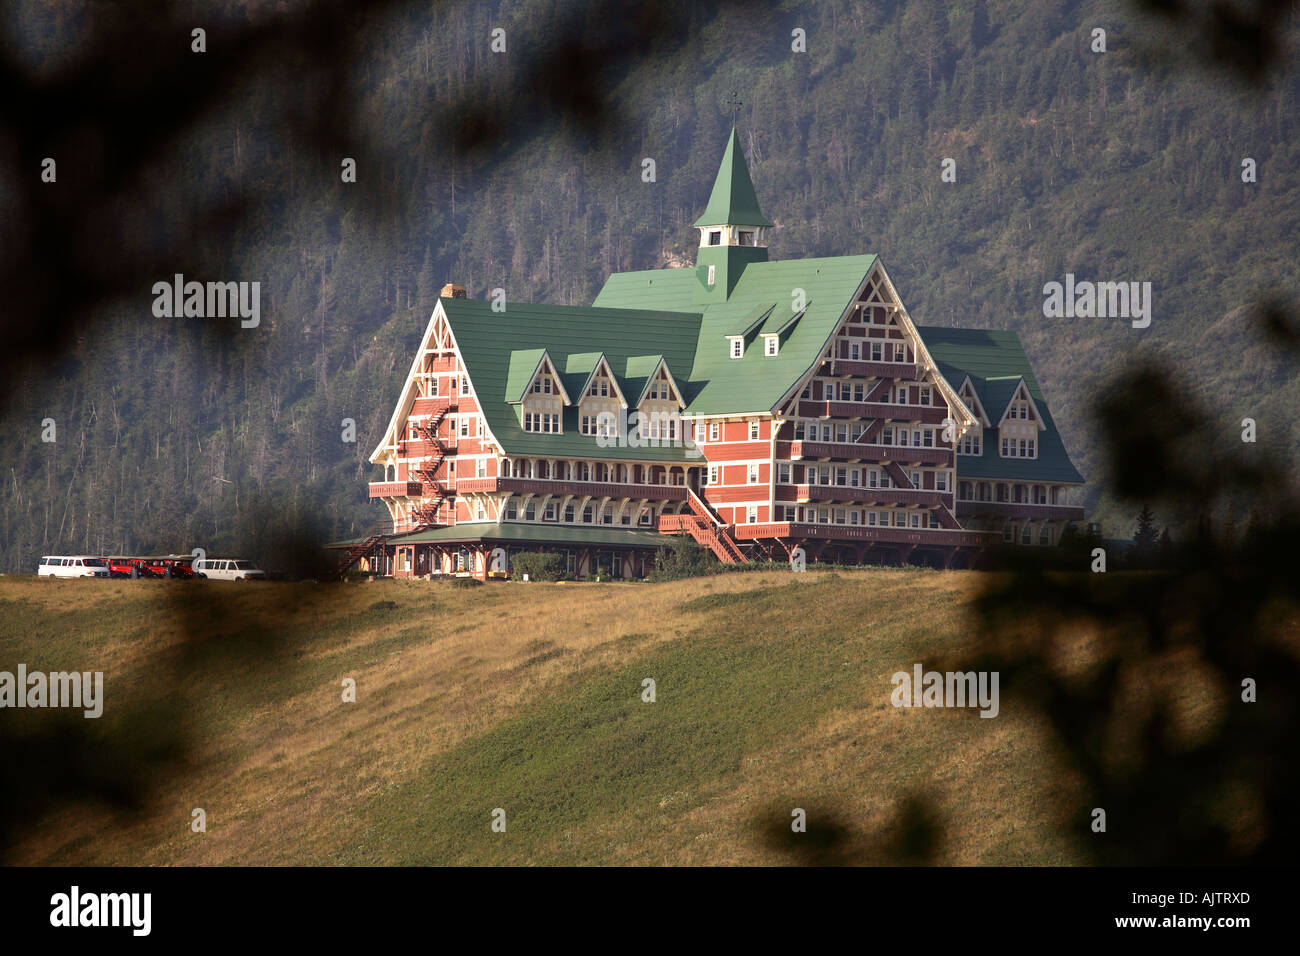 Prince of Wales Hotel in Waterton Lakes National Park in southwestern Alberta Canada Stock Photo